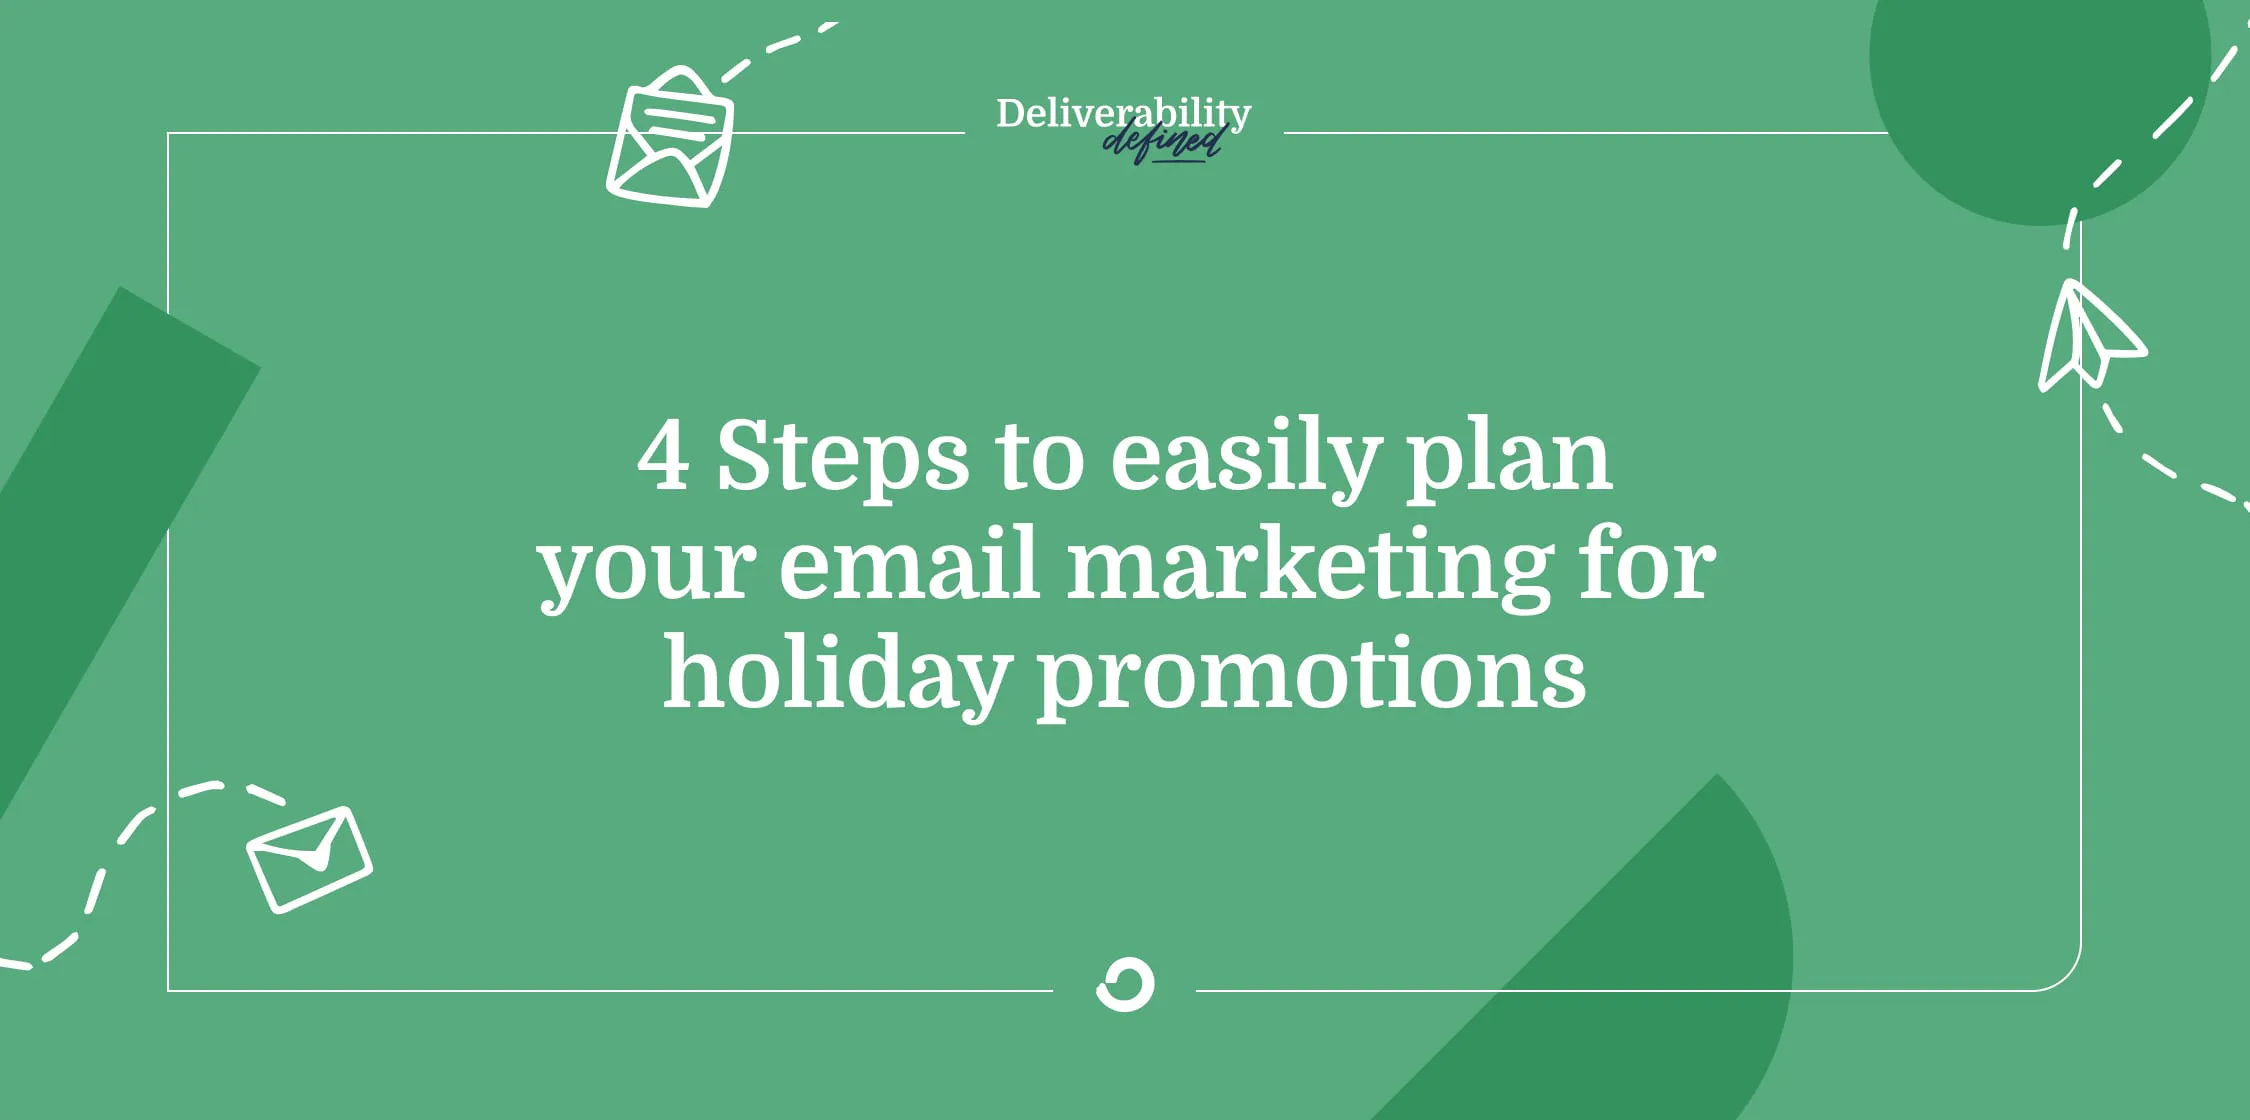 4 Steps to easily plan your email marketing for holiday promotions